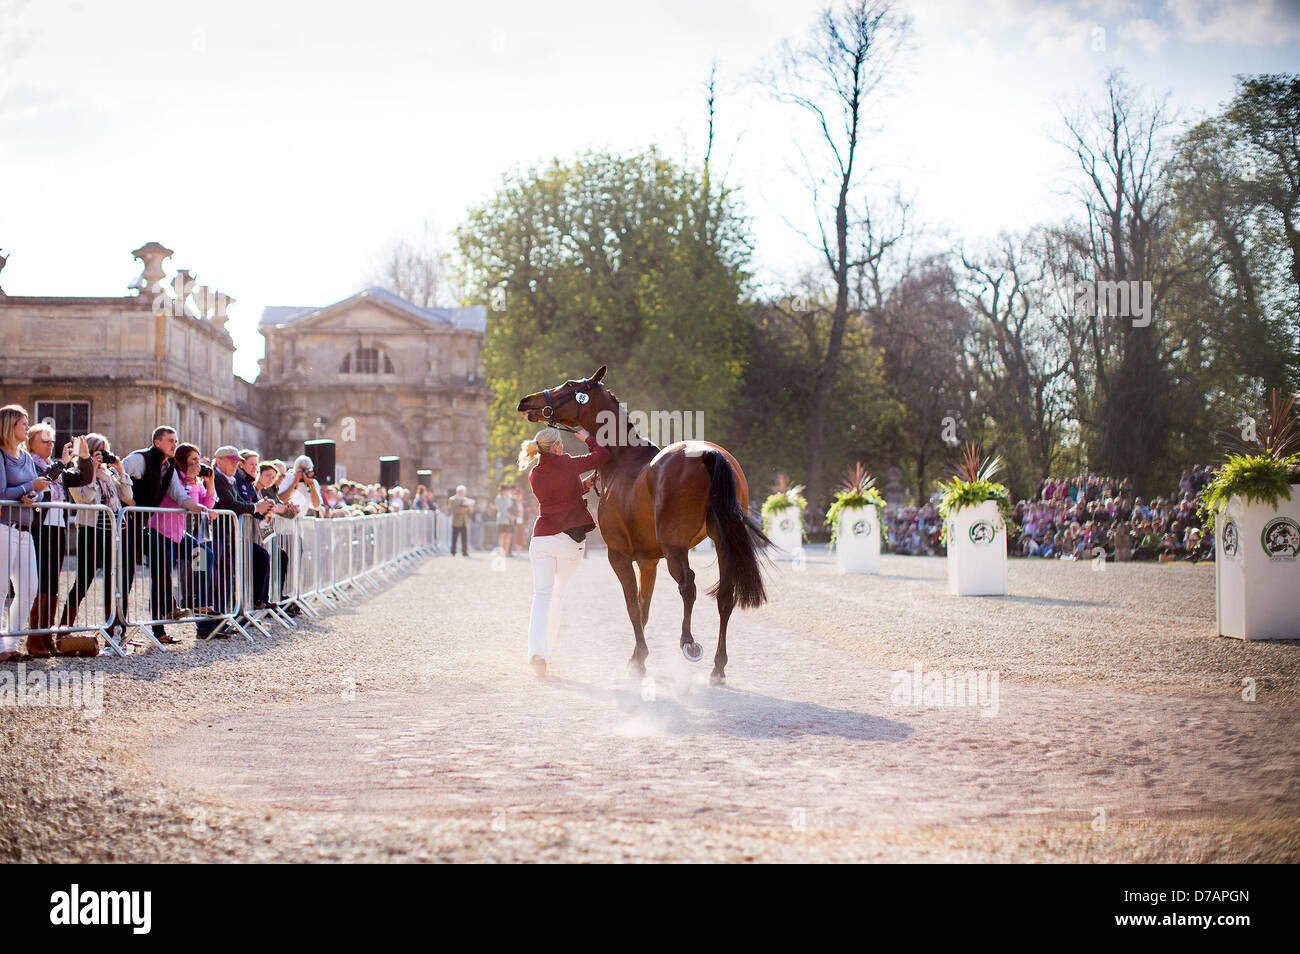 Badminton House, Gloucestershire, UK. 2nd May 2013.  Ms Zara Phillips MBE runs alongside her horse High Kingdom during First Horse Inspection at the Badminton Horse Trials, held in the park of Badminton House, Gloucestershire. Zara, the daughter of the Princess Royal and granddaughter of Queen Elizabeth II, won a silver medal during the London Olympic Games. 2nd May 2013. Credit: Adam Gasson/Alamy Live News Stock Photo